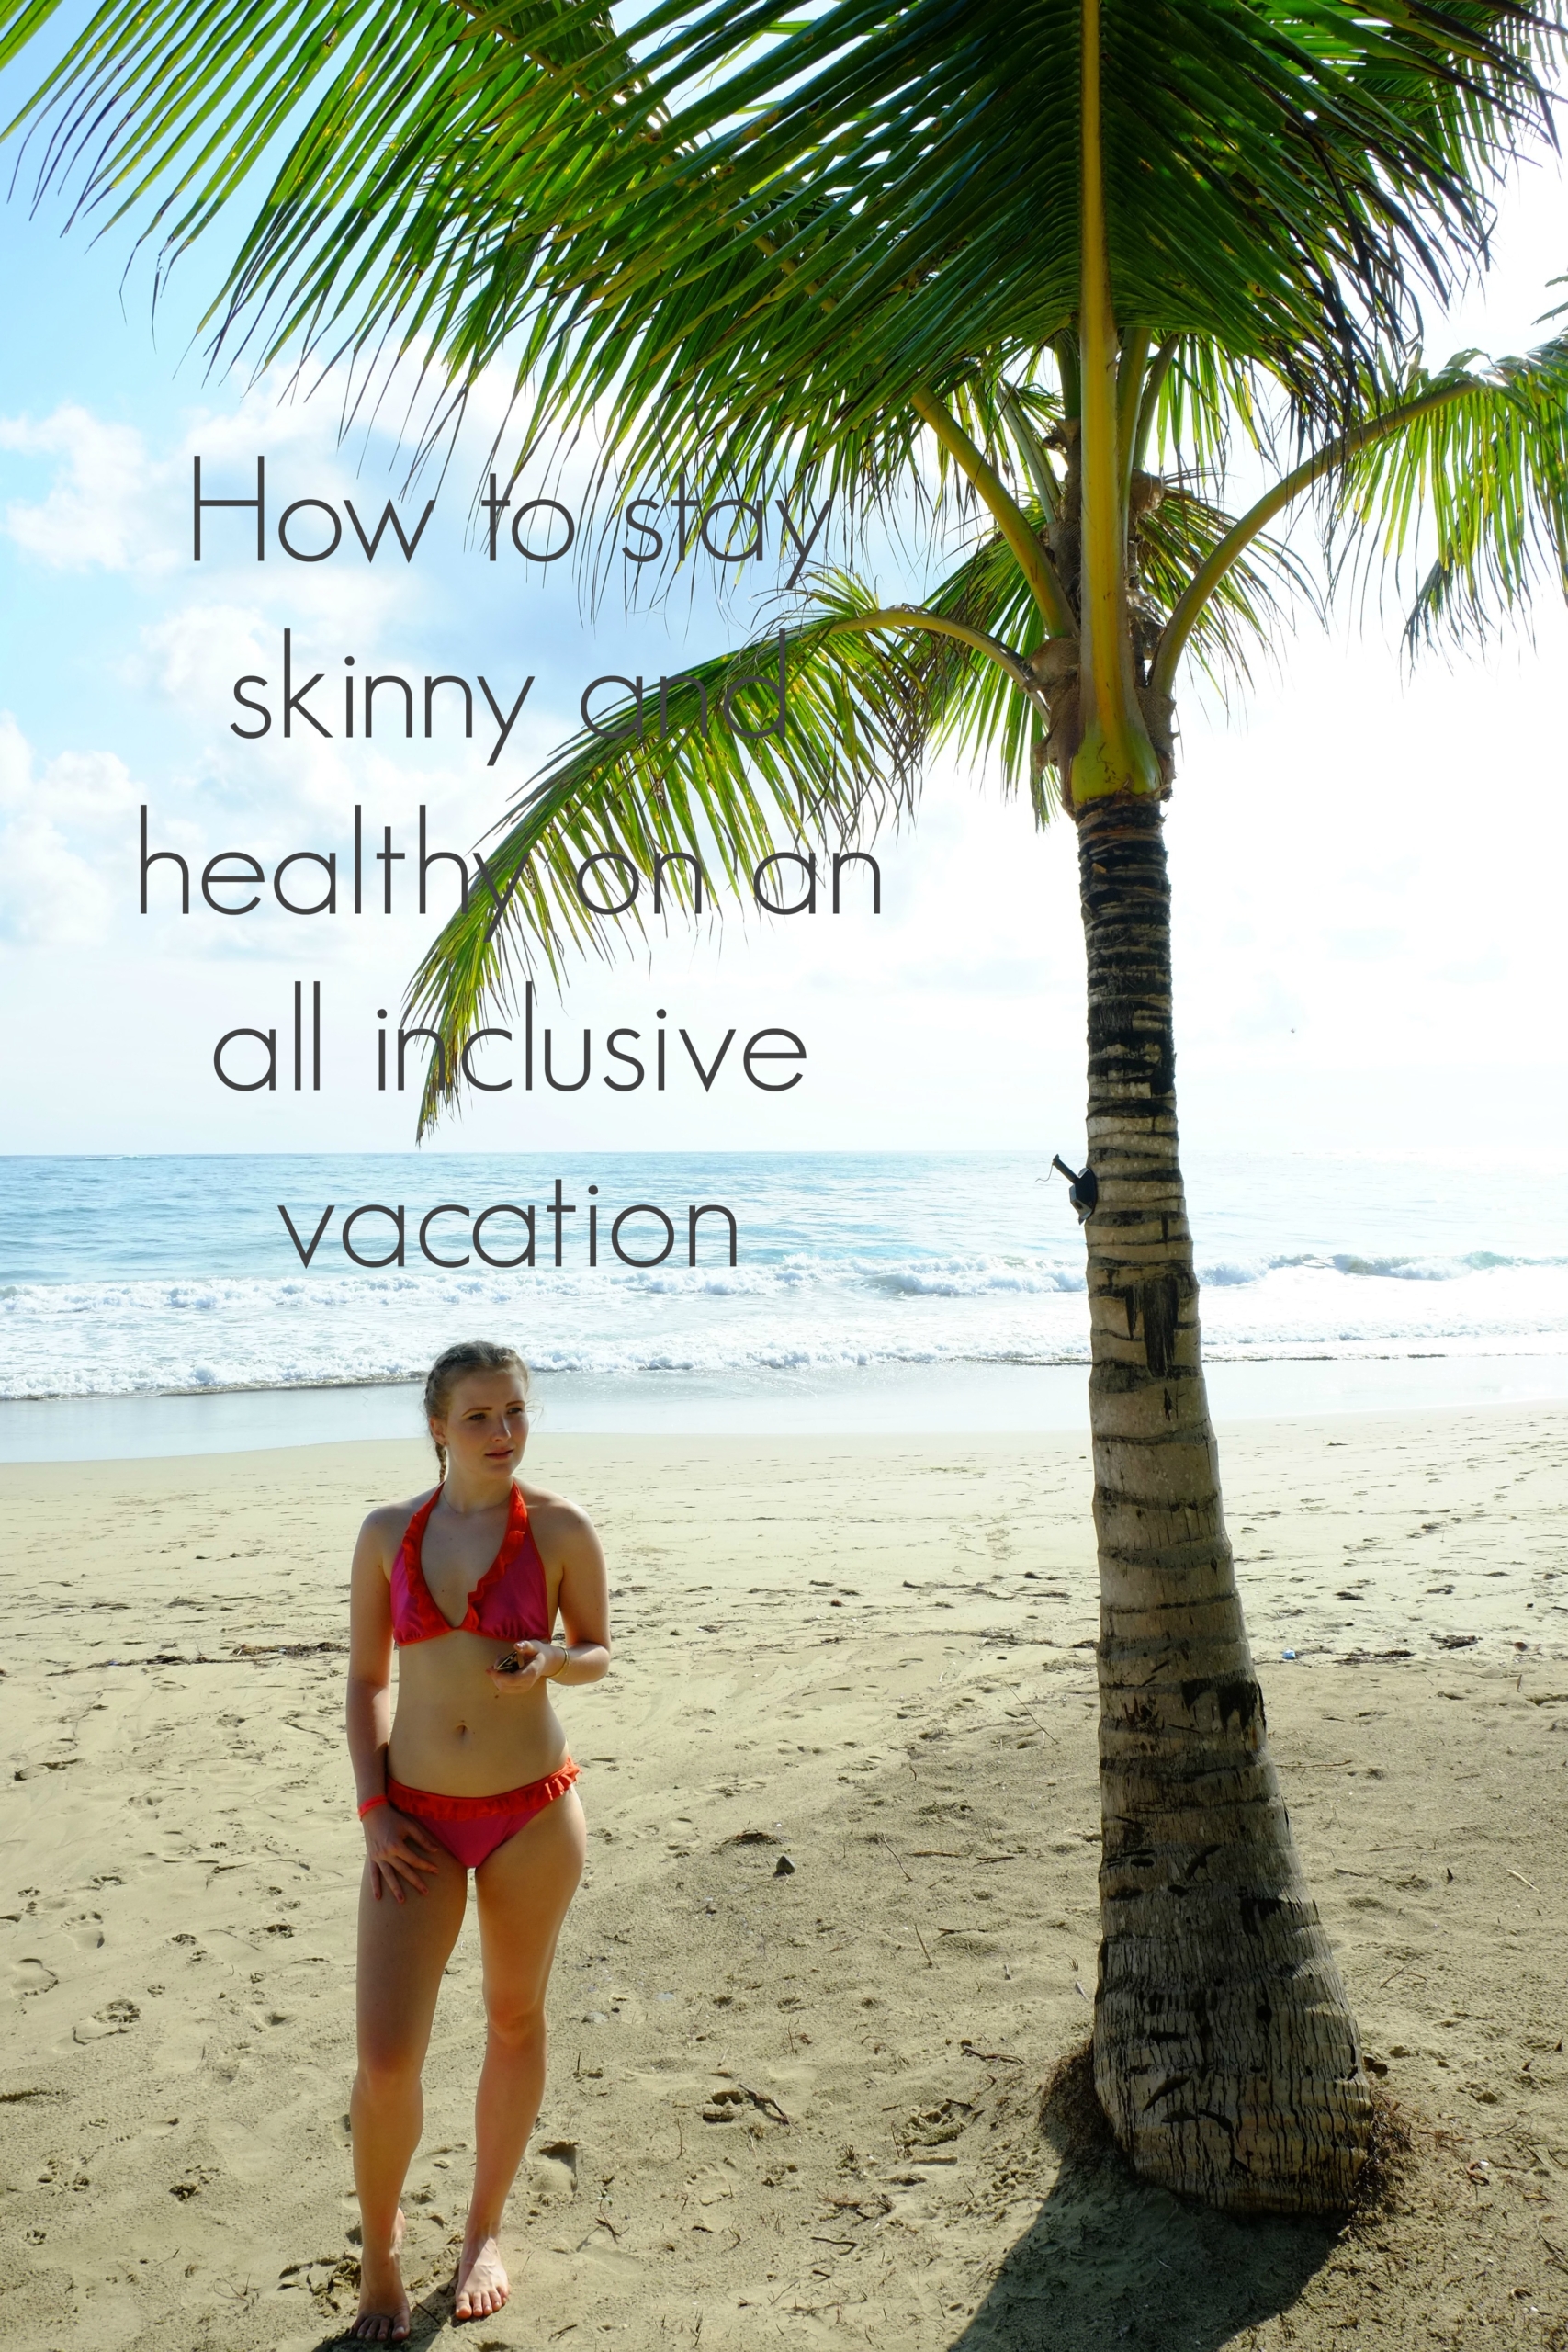 How to stay skinny and healthy on an all inclusive vacation